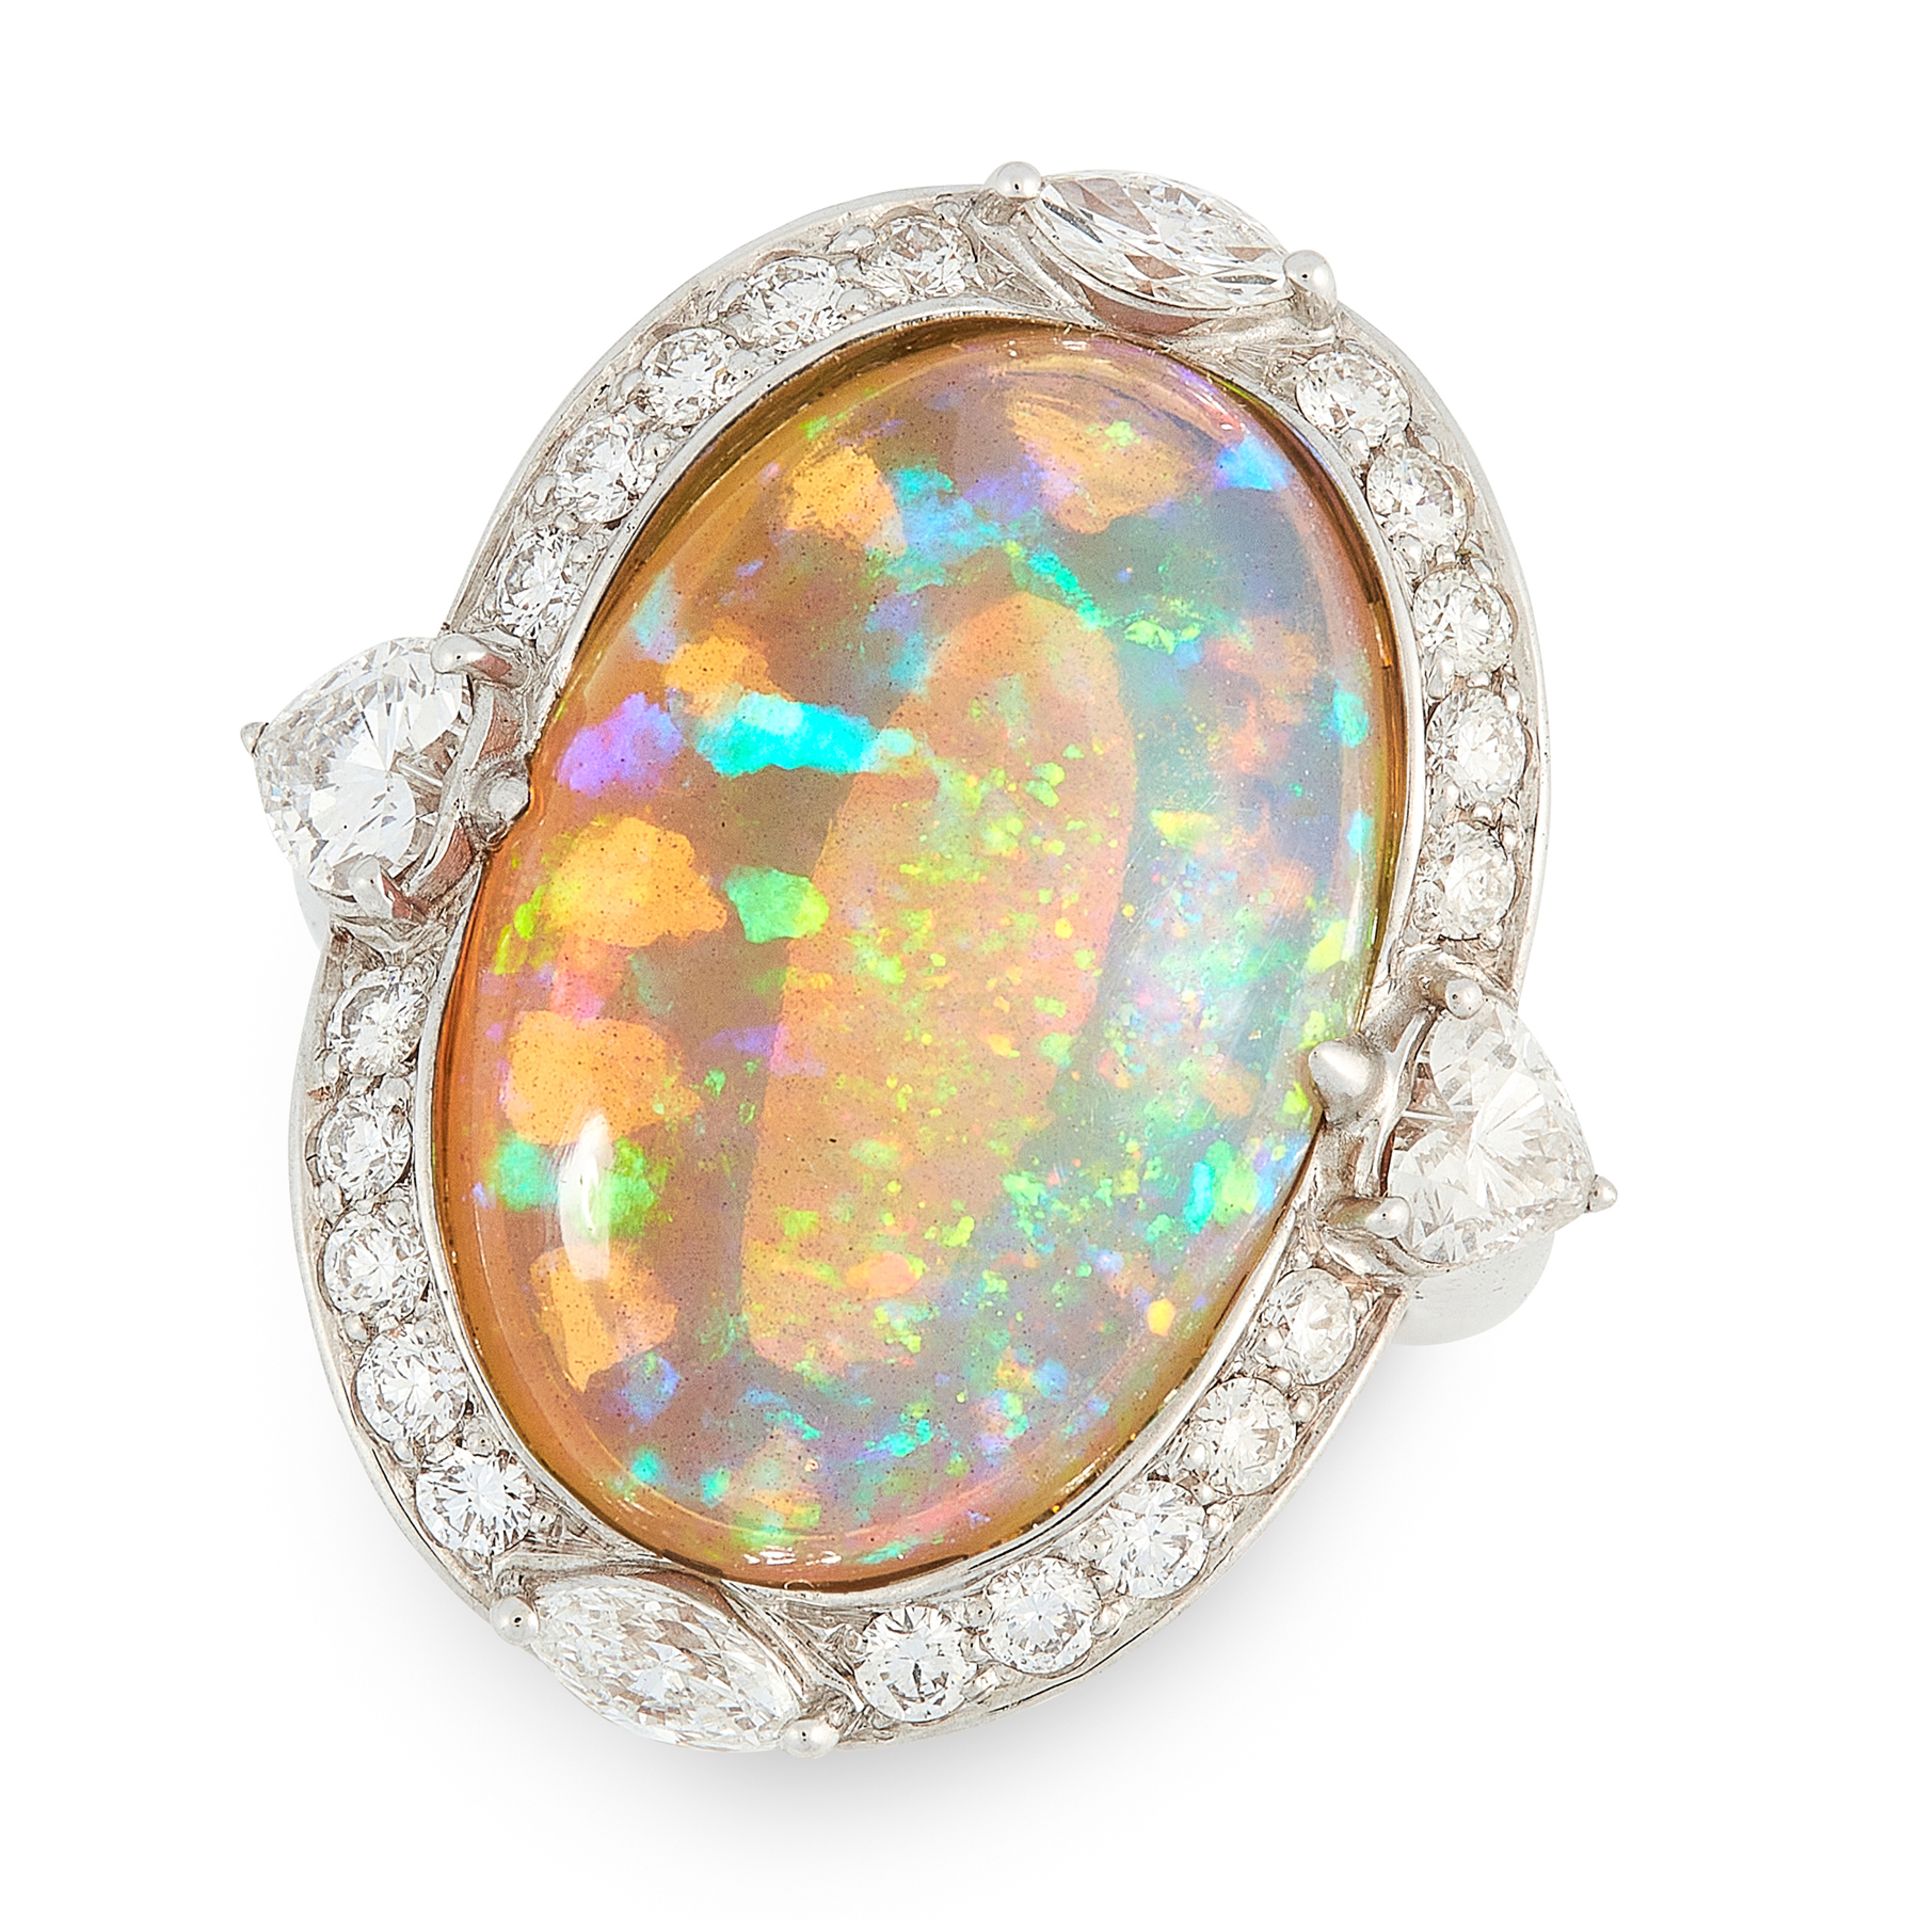 AN OPAL AND DIAMOND RING in 18ct white gold, set with an oval cabochon opal of 13.50 carats,